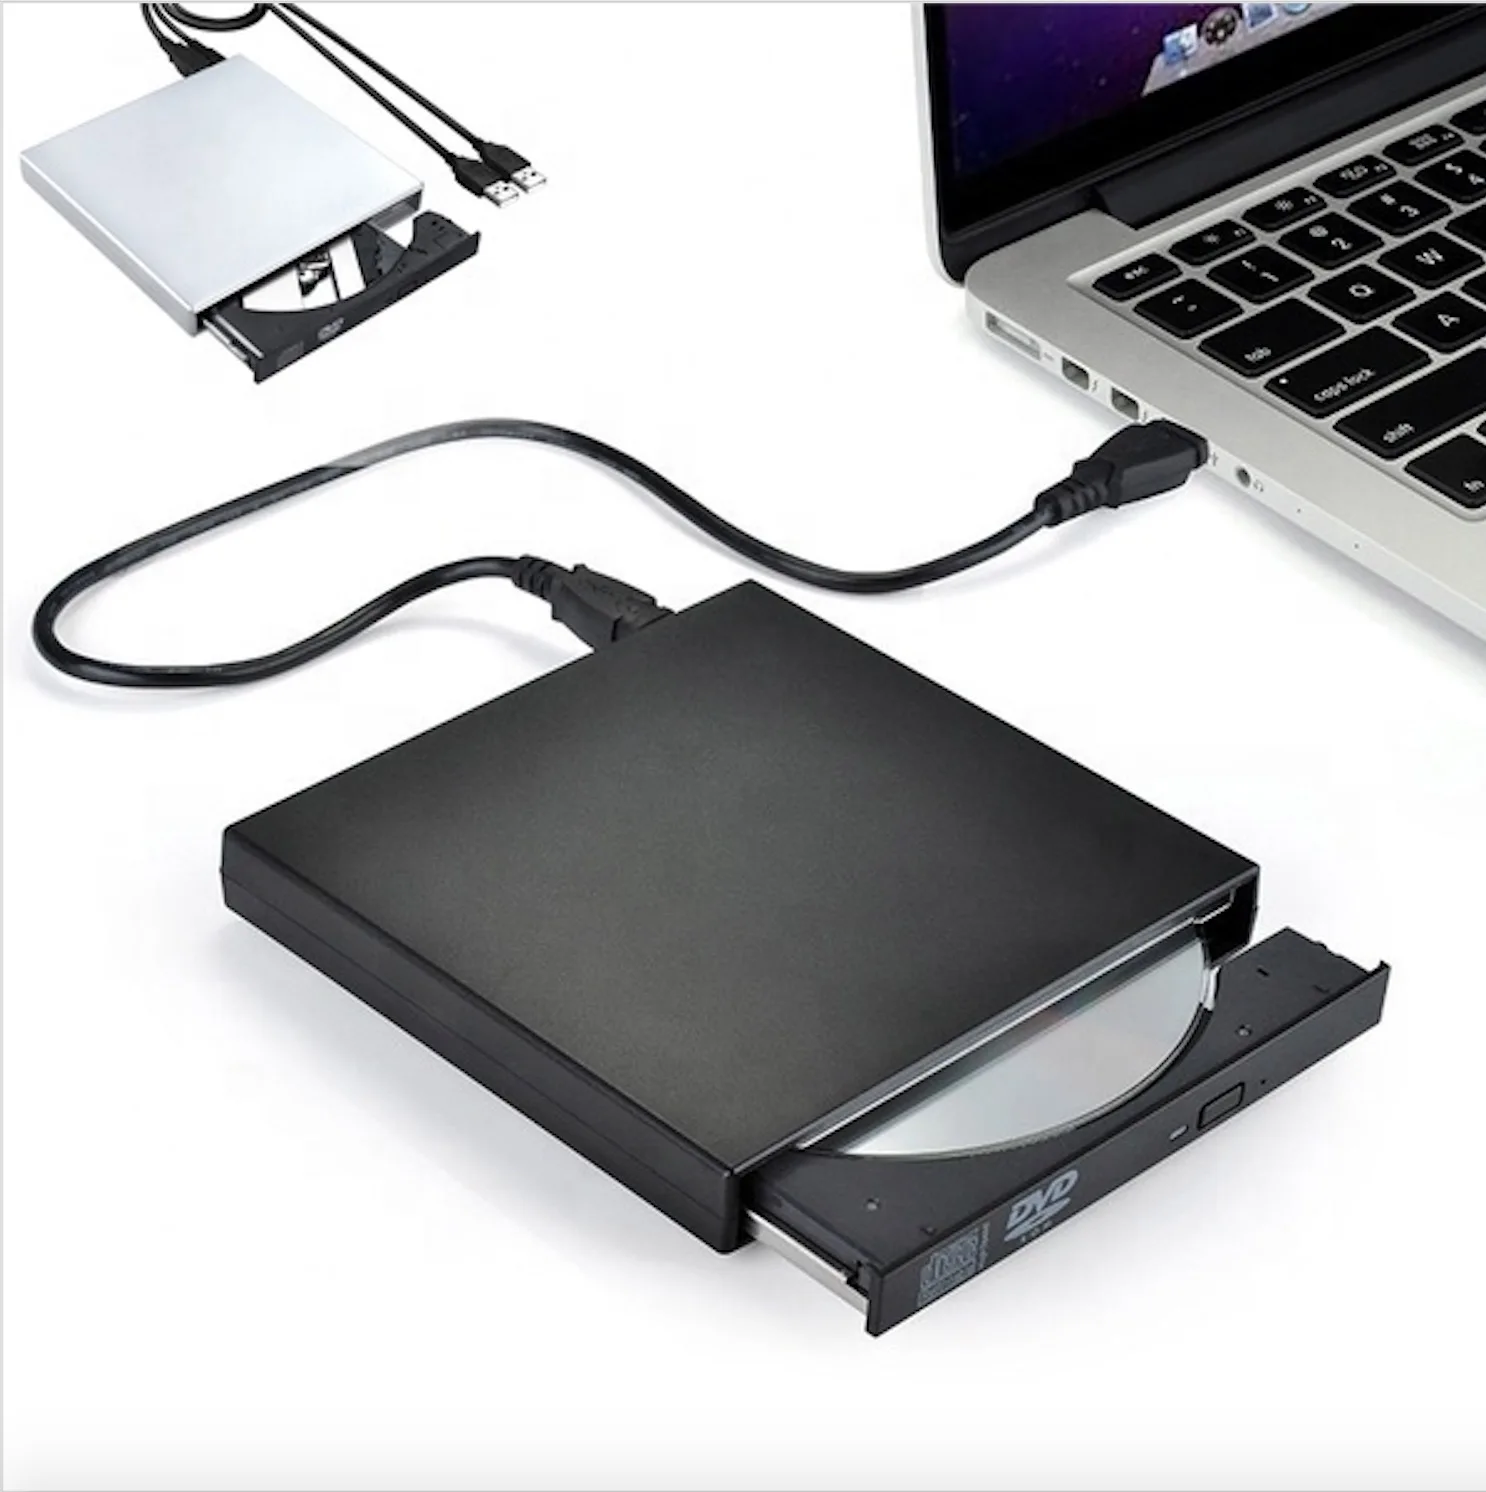 

USB External CD-RW Burner DVD/CD Reader Player with Two USB Cables for Windows Mac OS Laptop Computer, Black